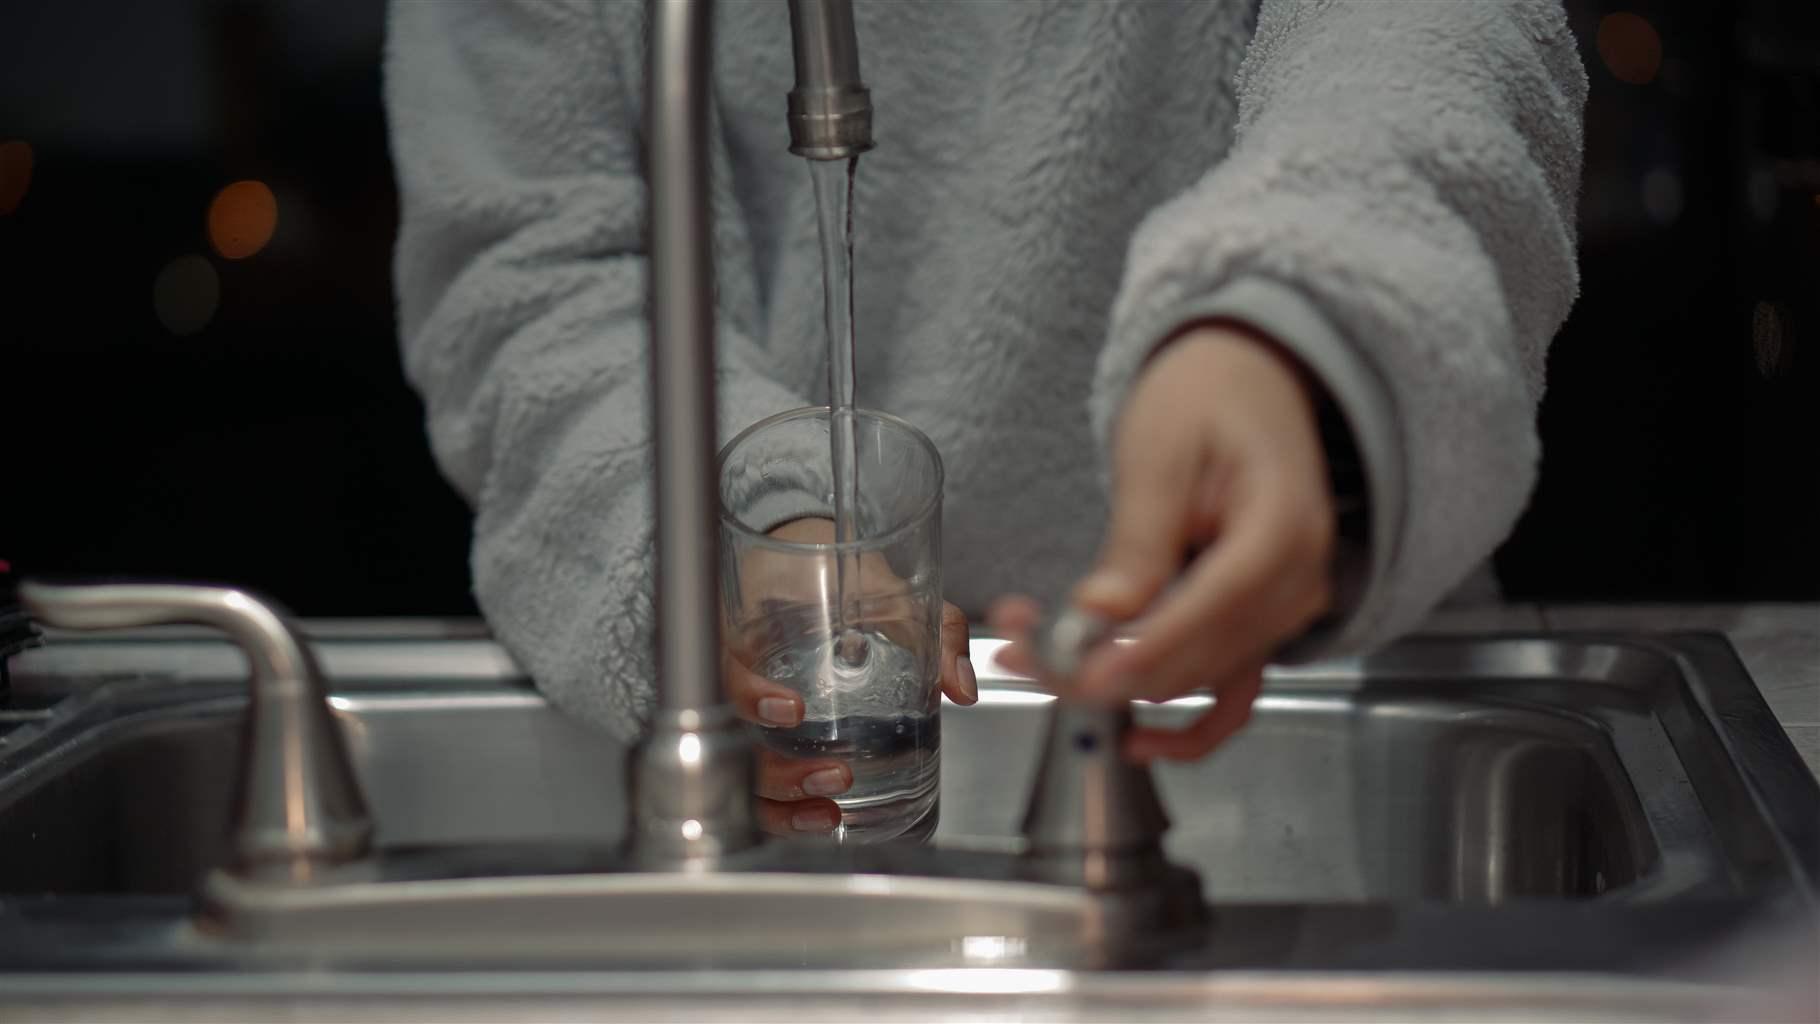 person filling up water glass in sink